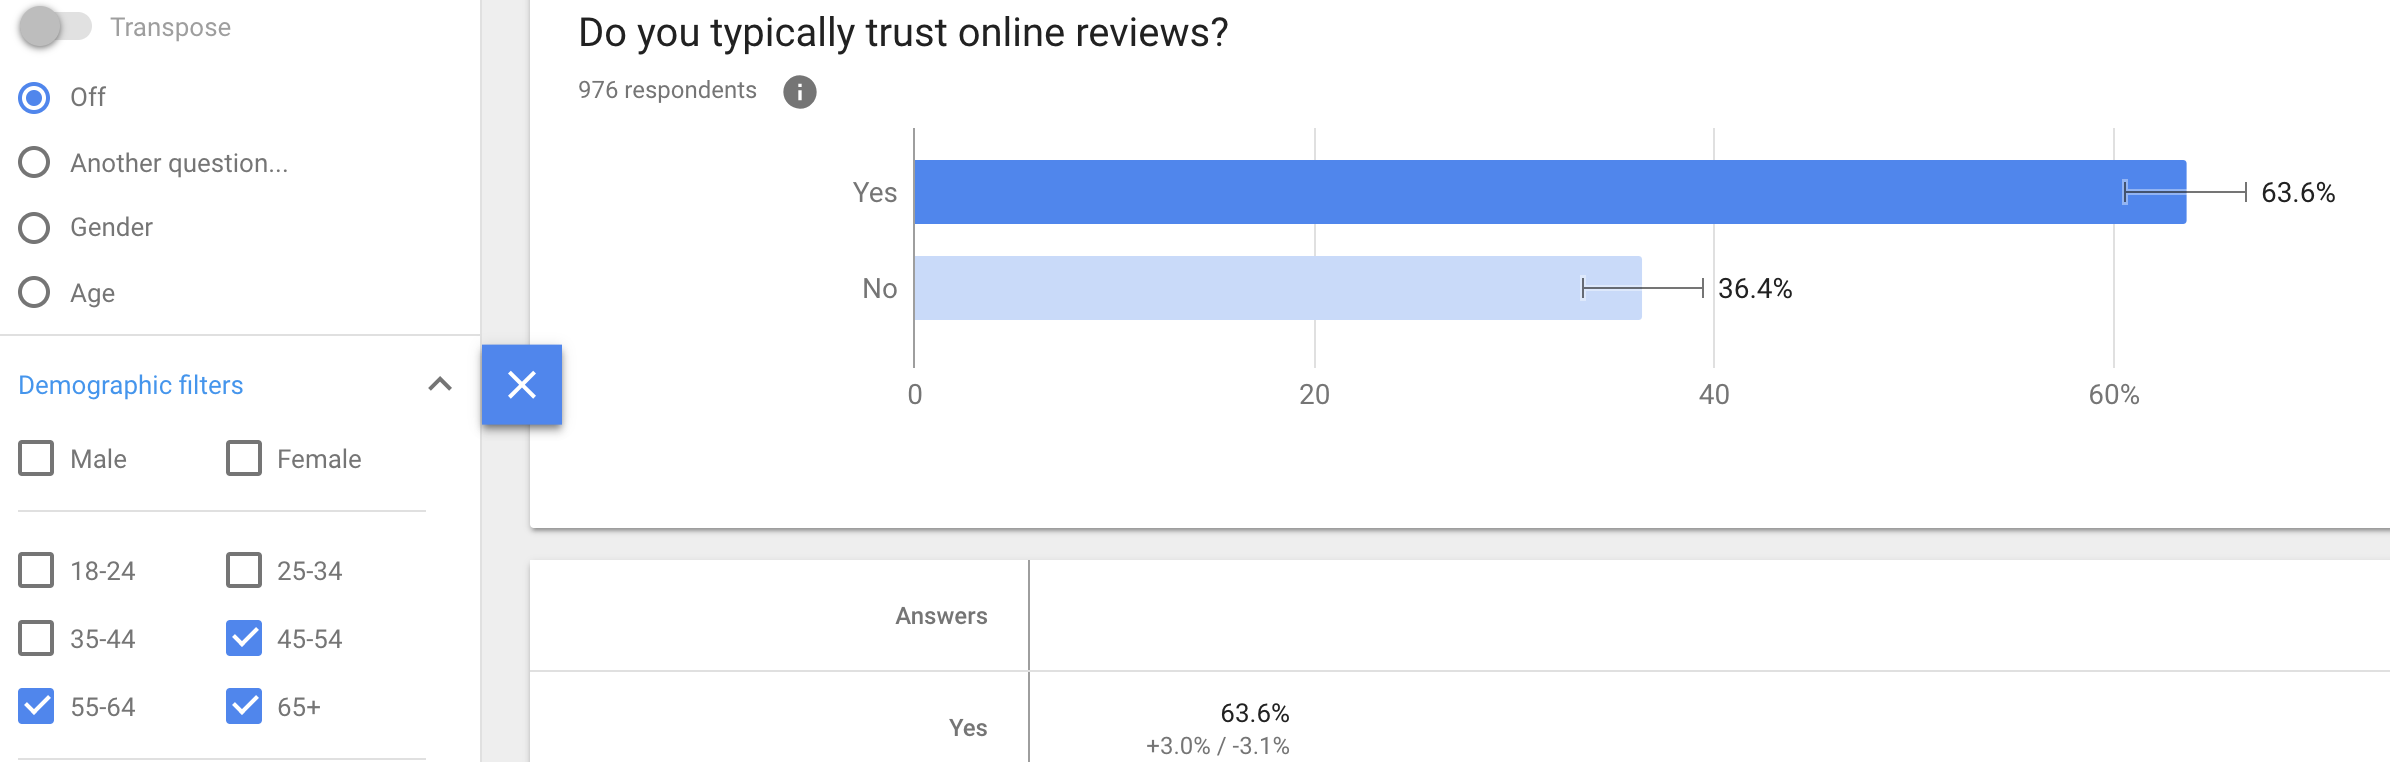 Do you typically trust online reviews? Demographic (45-65+)